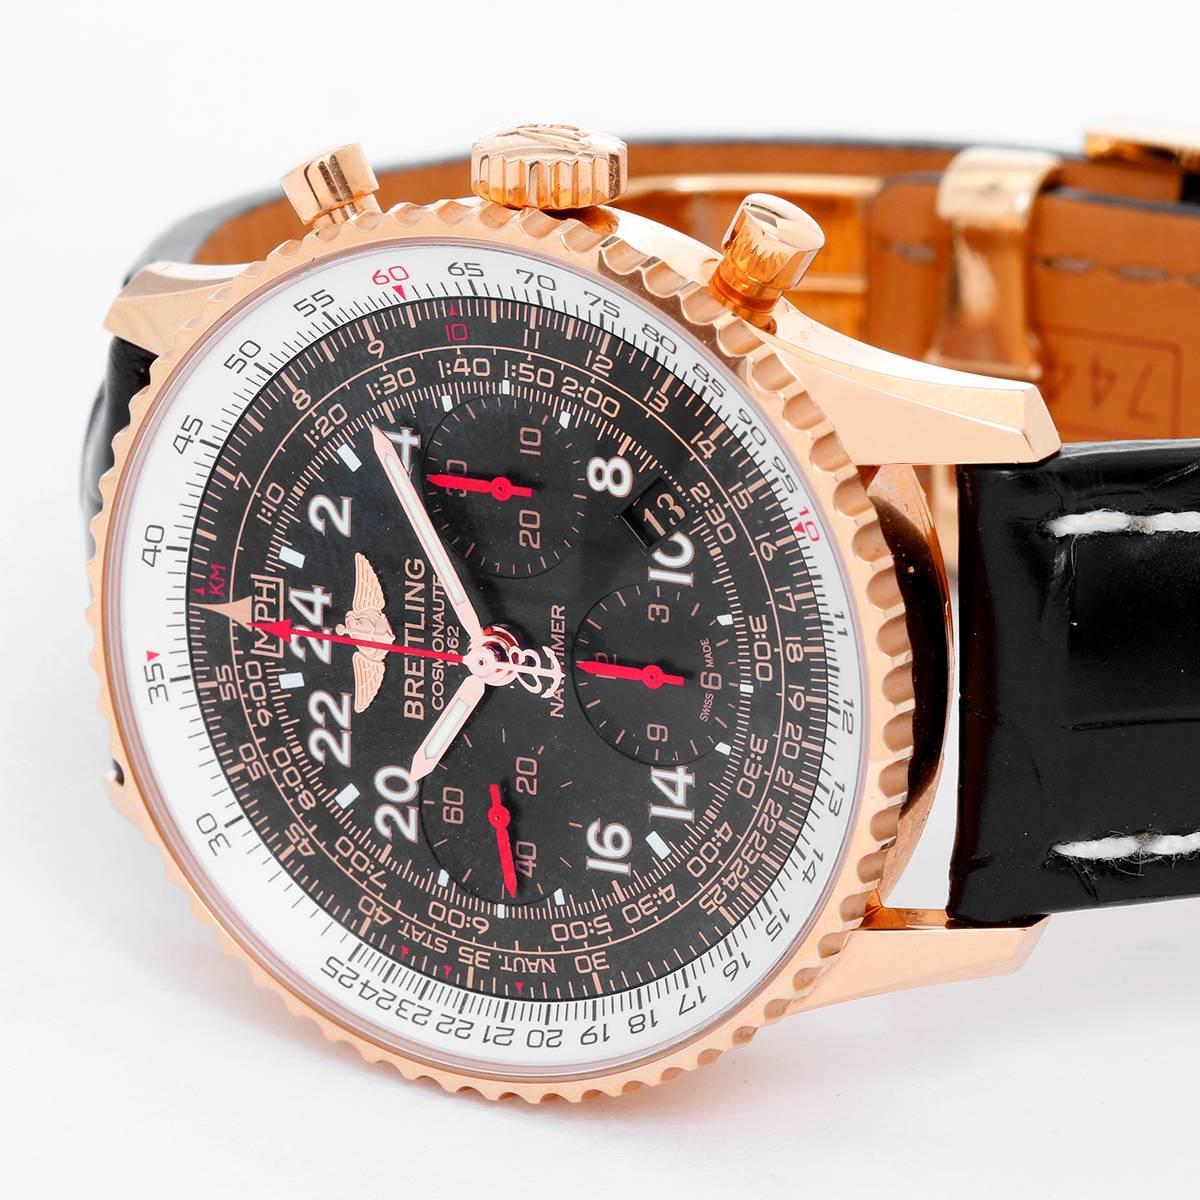 Breitling Navitimer Cosmonaute Rose Gold RB0210 -  Automatic. 18K Rose Gold ( 43 mm ). Black dial with Arabic numerals; sub dials with red hands. Black Breitling alligator strap. Pre-owned with  Breitling box and papers. Limited edition 57 /250.